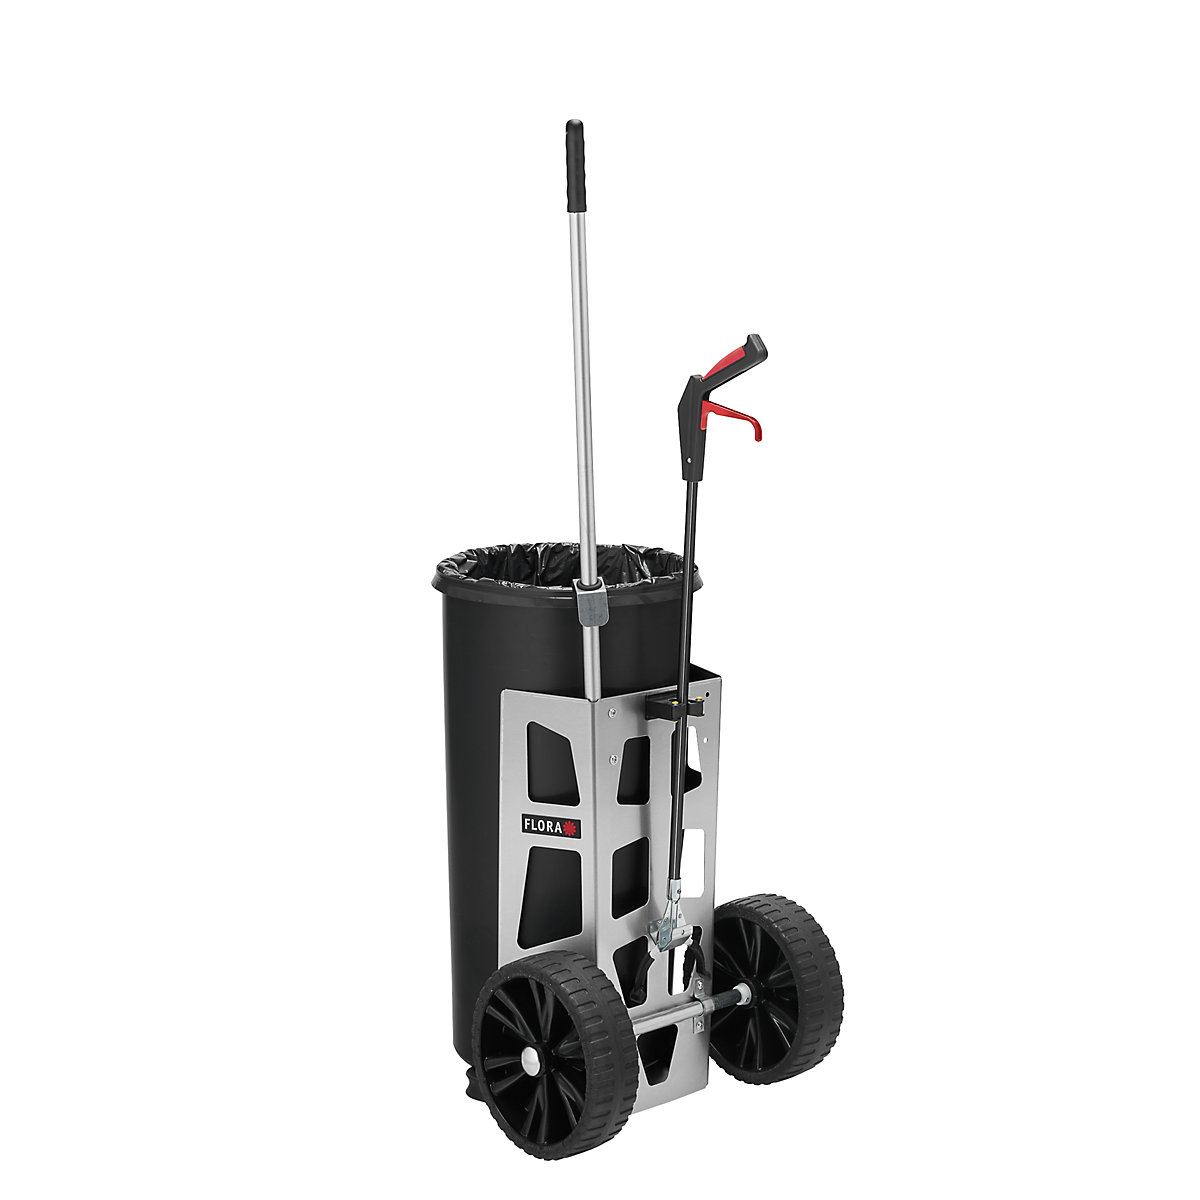 EASY UNO waste collection trolley - FLORA